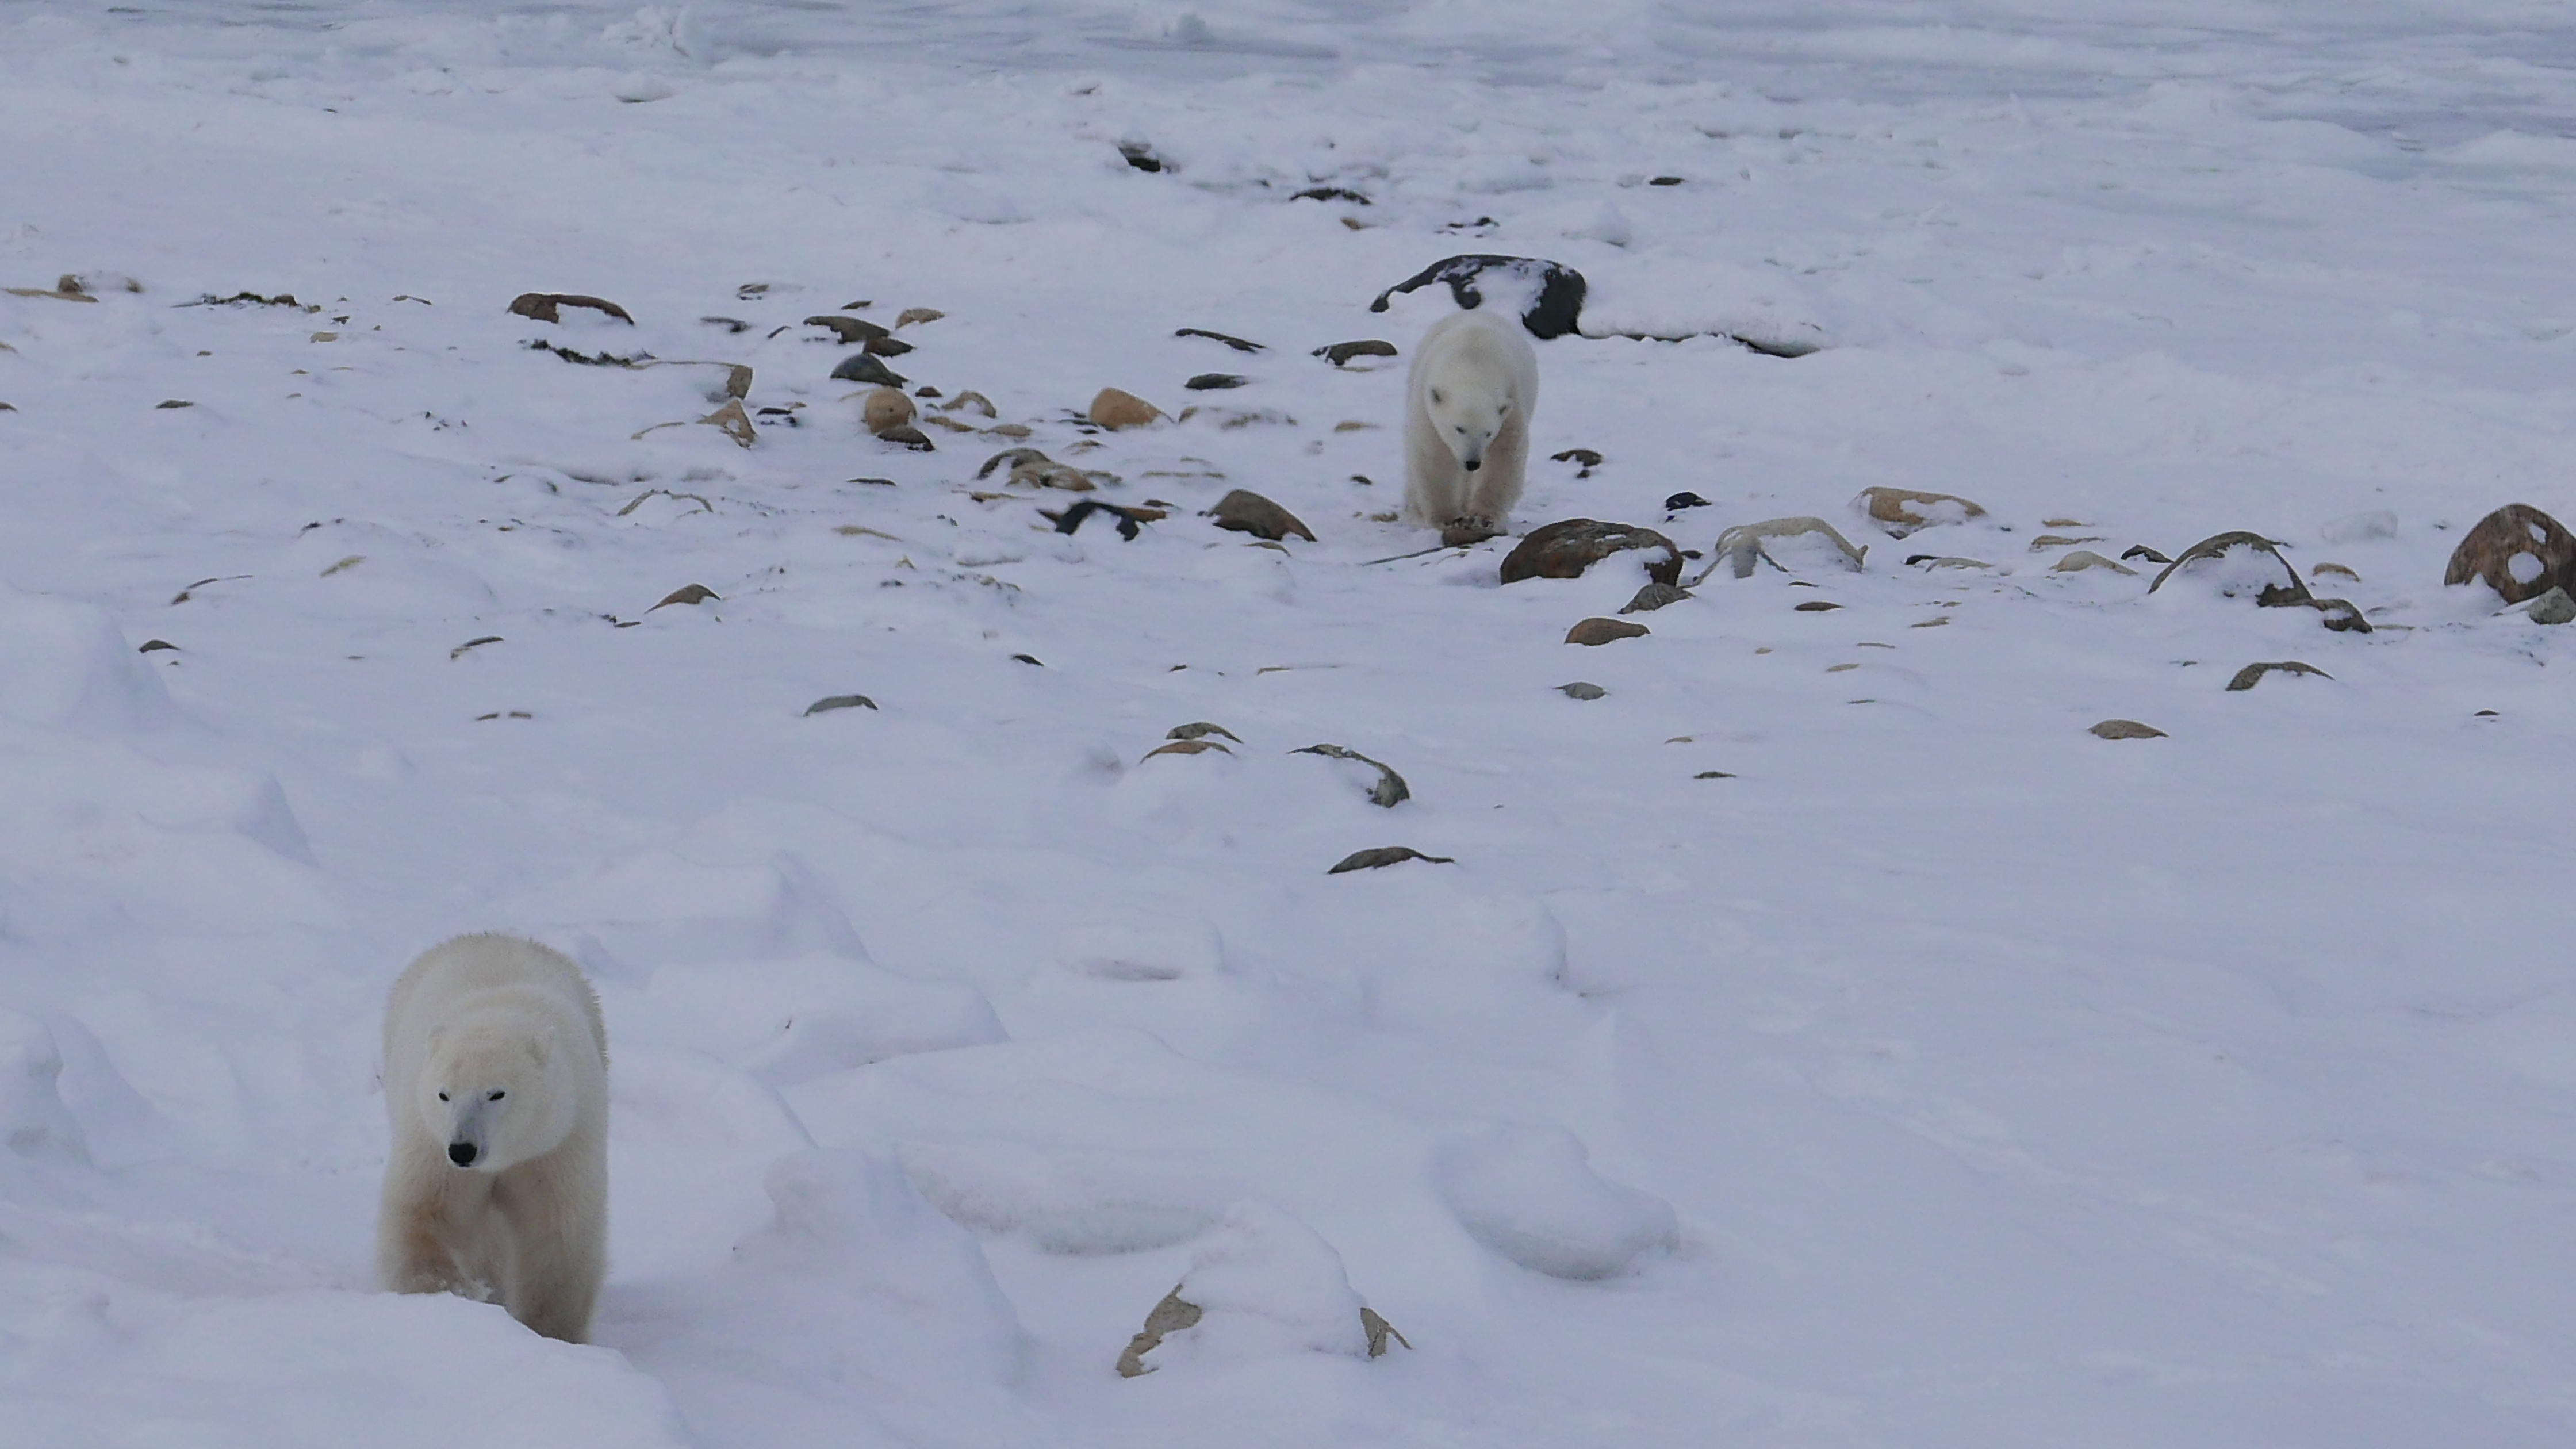 Climate Change Makes Polar Bears Work Harder to Survive by Megan Owen